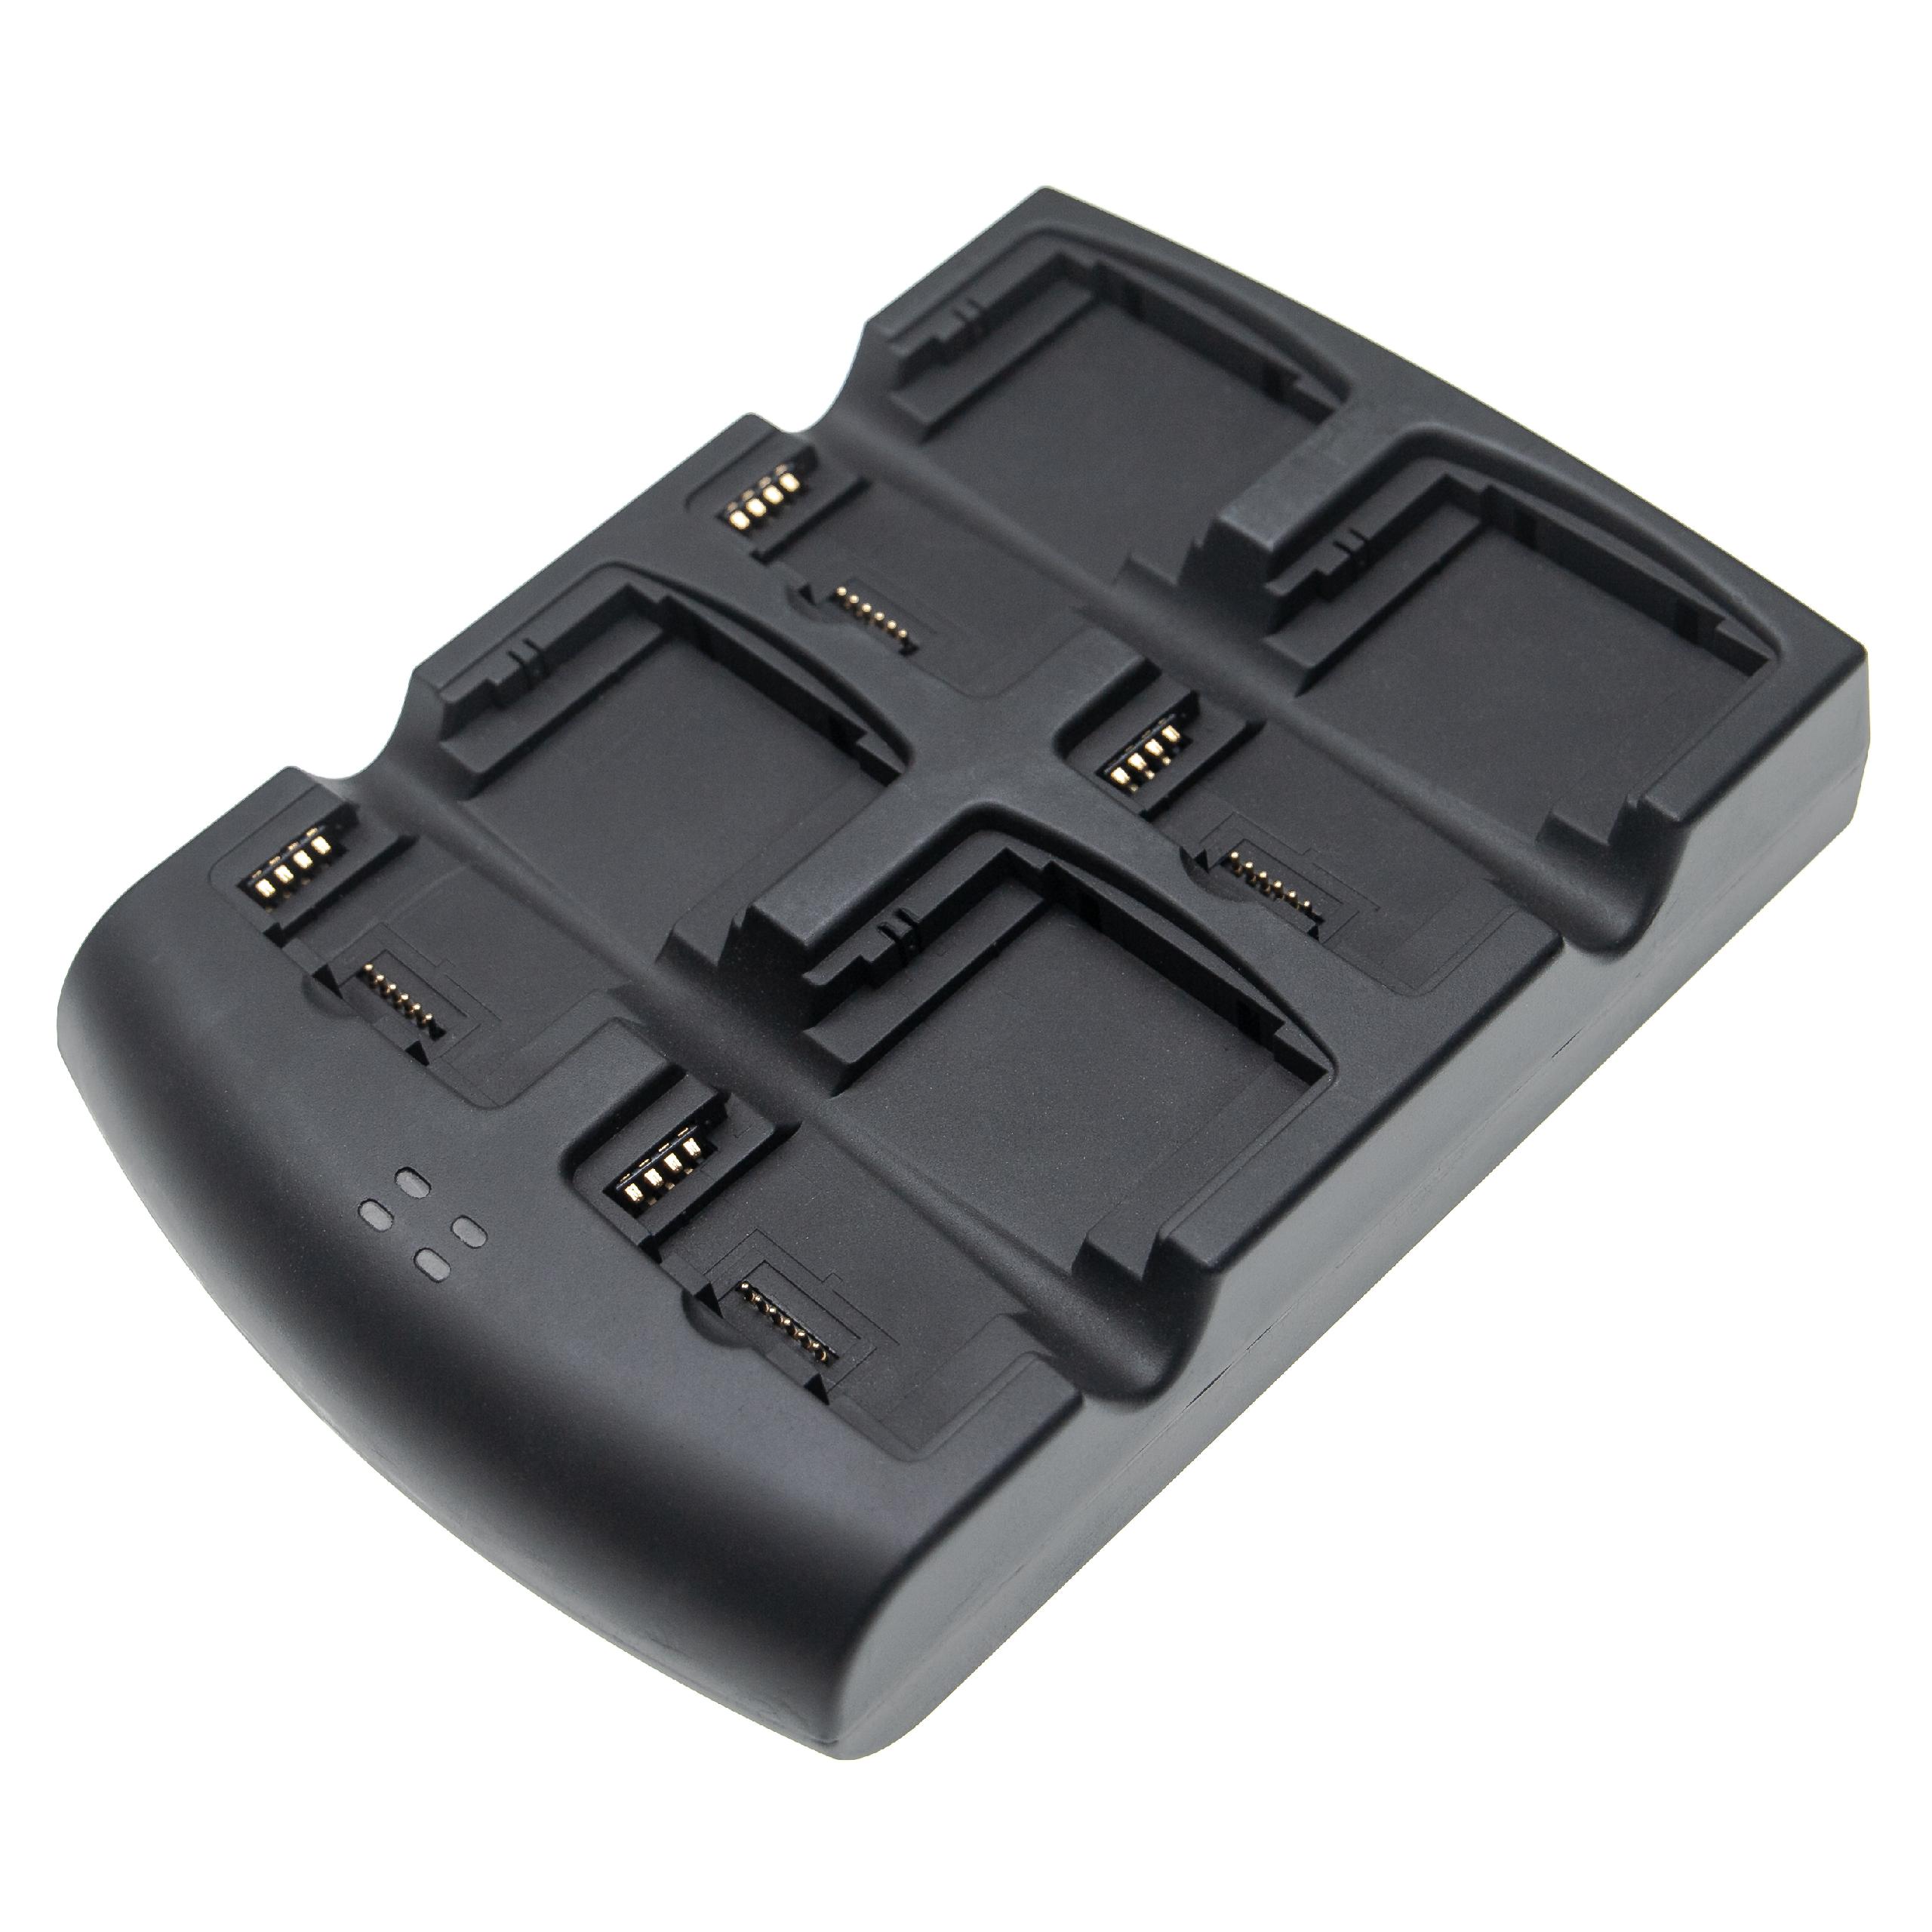 4-slot Charger replaces Symbol 55-0211152-02, 55-002148-01, 402-64123 for Barcode Scanner/Batteries